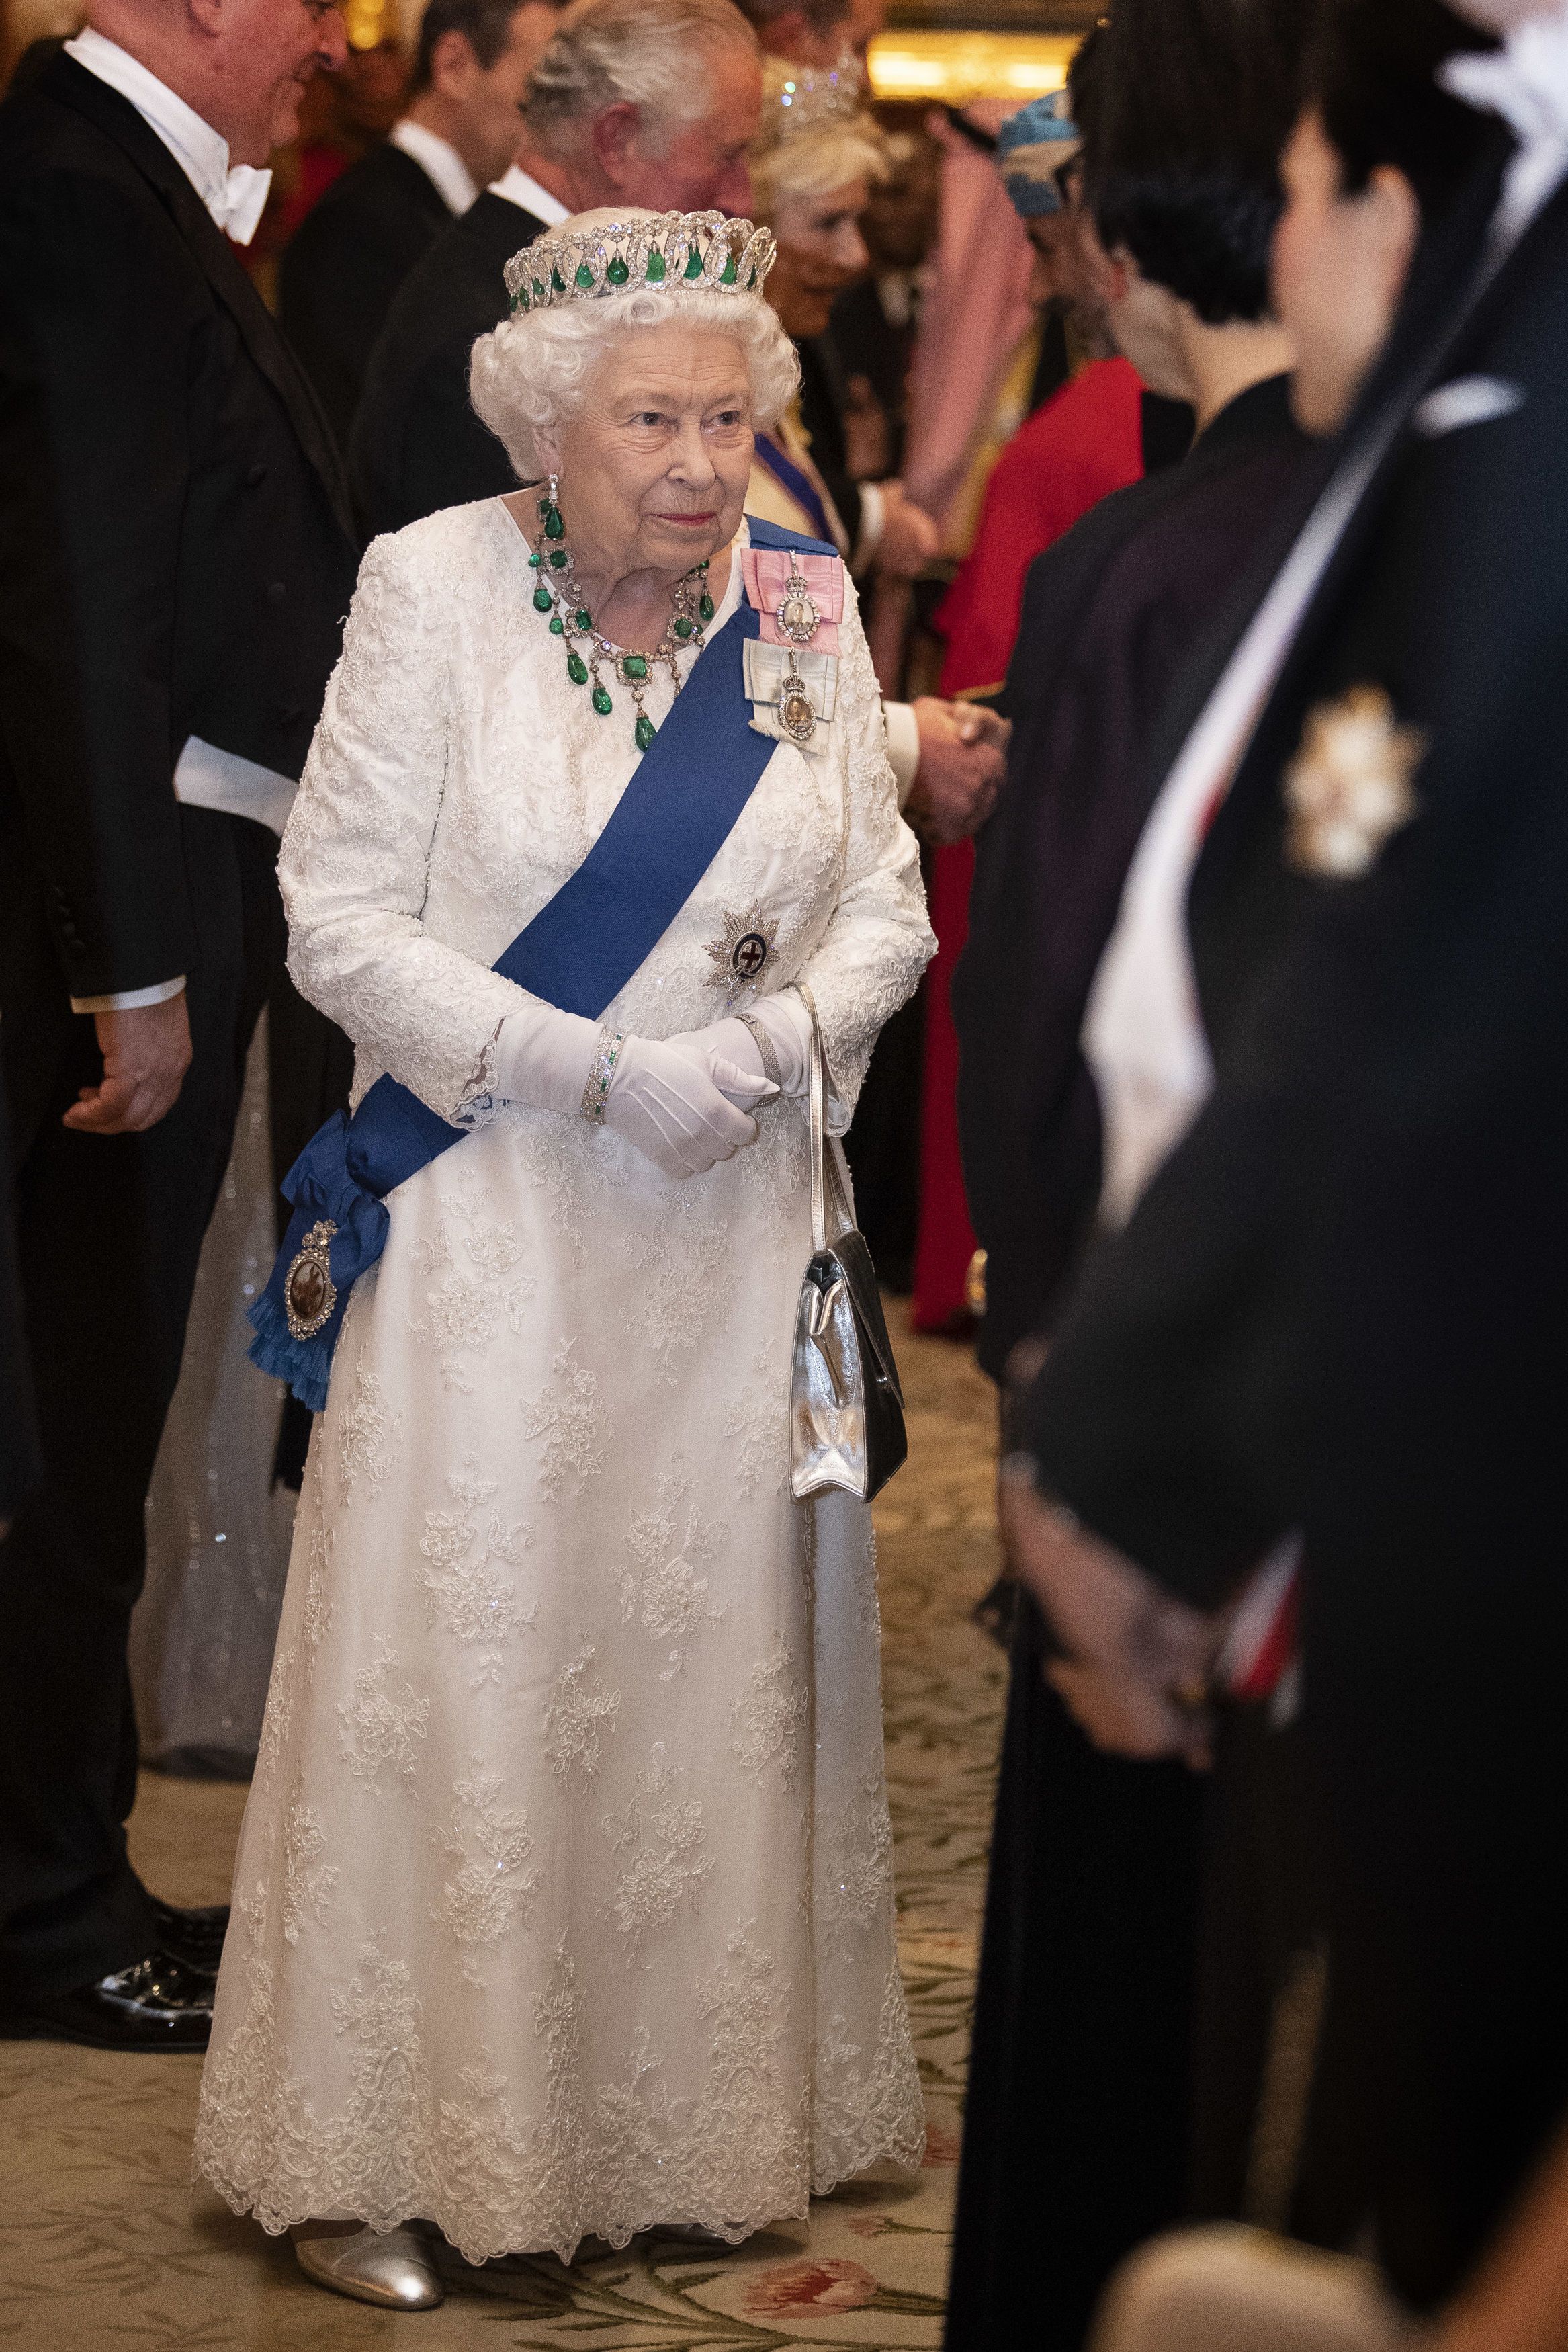 Queen Elizabeth II Marries Tradition and Fashion for the Order of